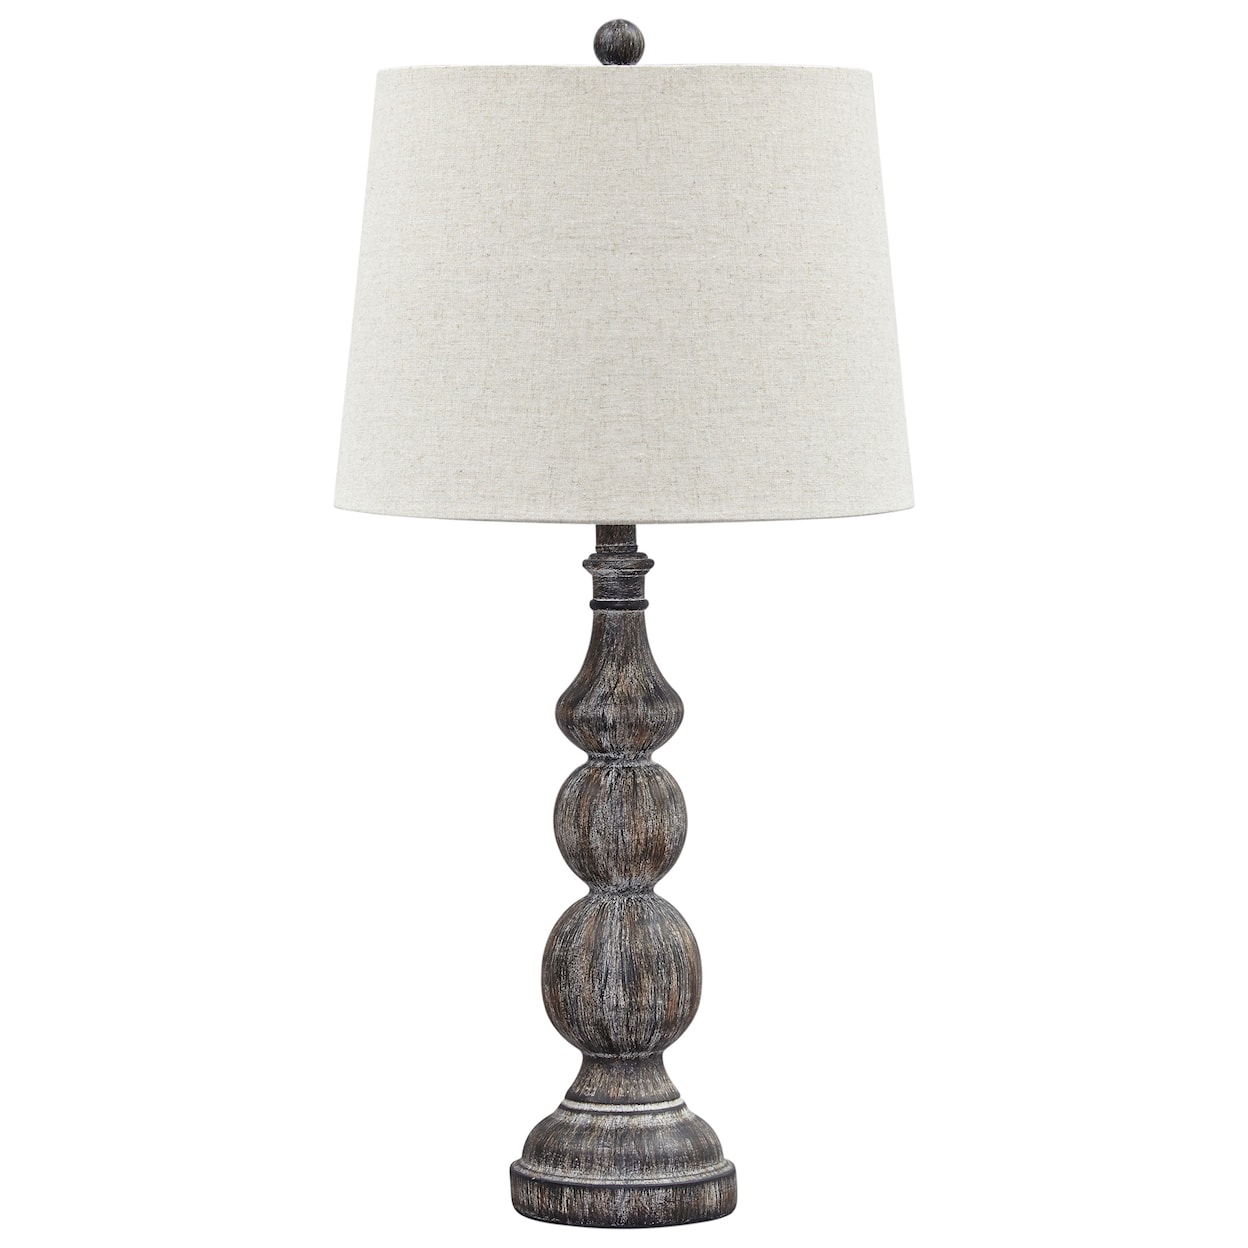 Signature Design by Ashley Lamps - Traditional Classics Set of 2 Mair Antique Black Poly Table Lamps